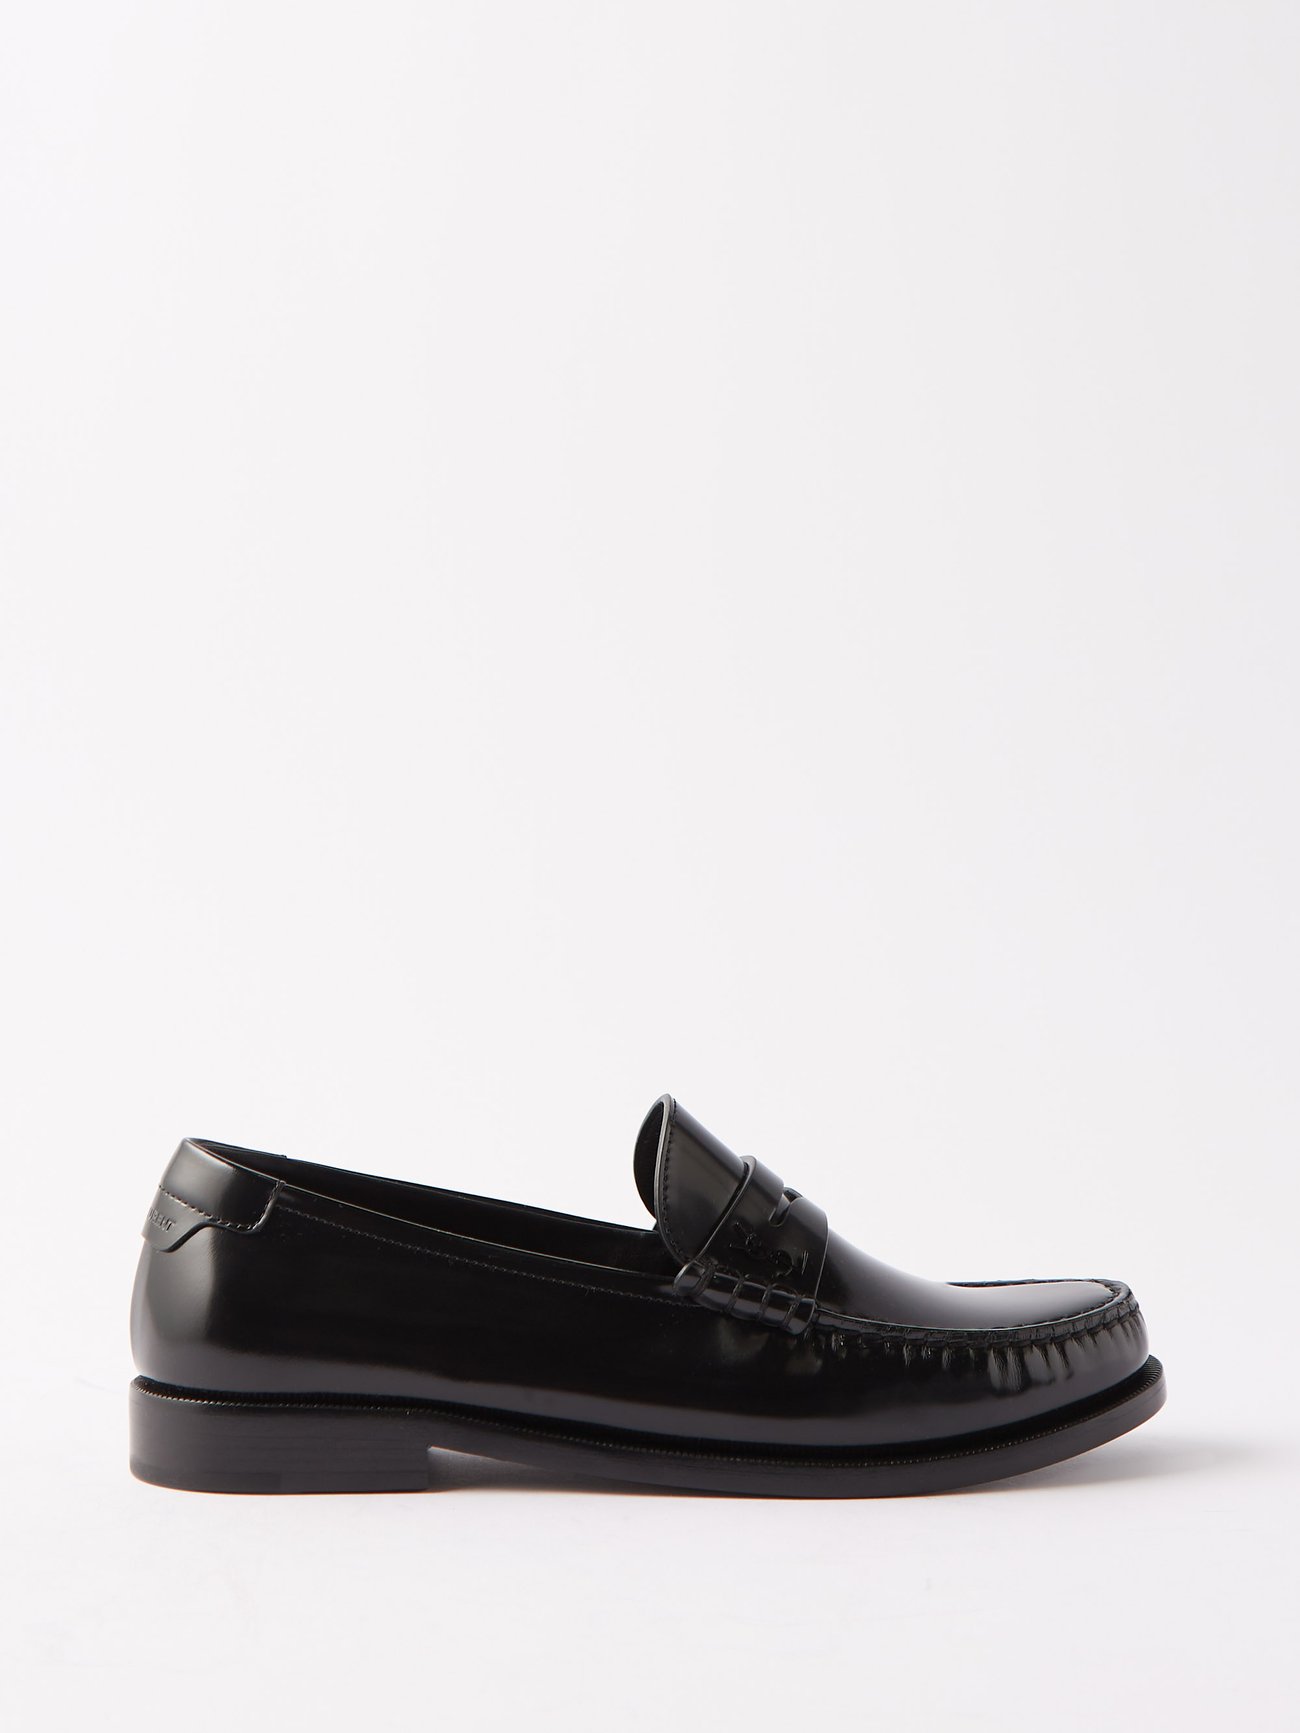 These Prada Loafers Are A Winter Cult Buy | Who What Wear UK